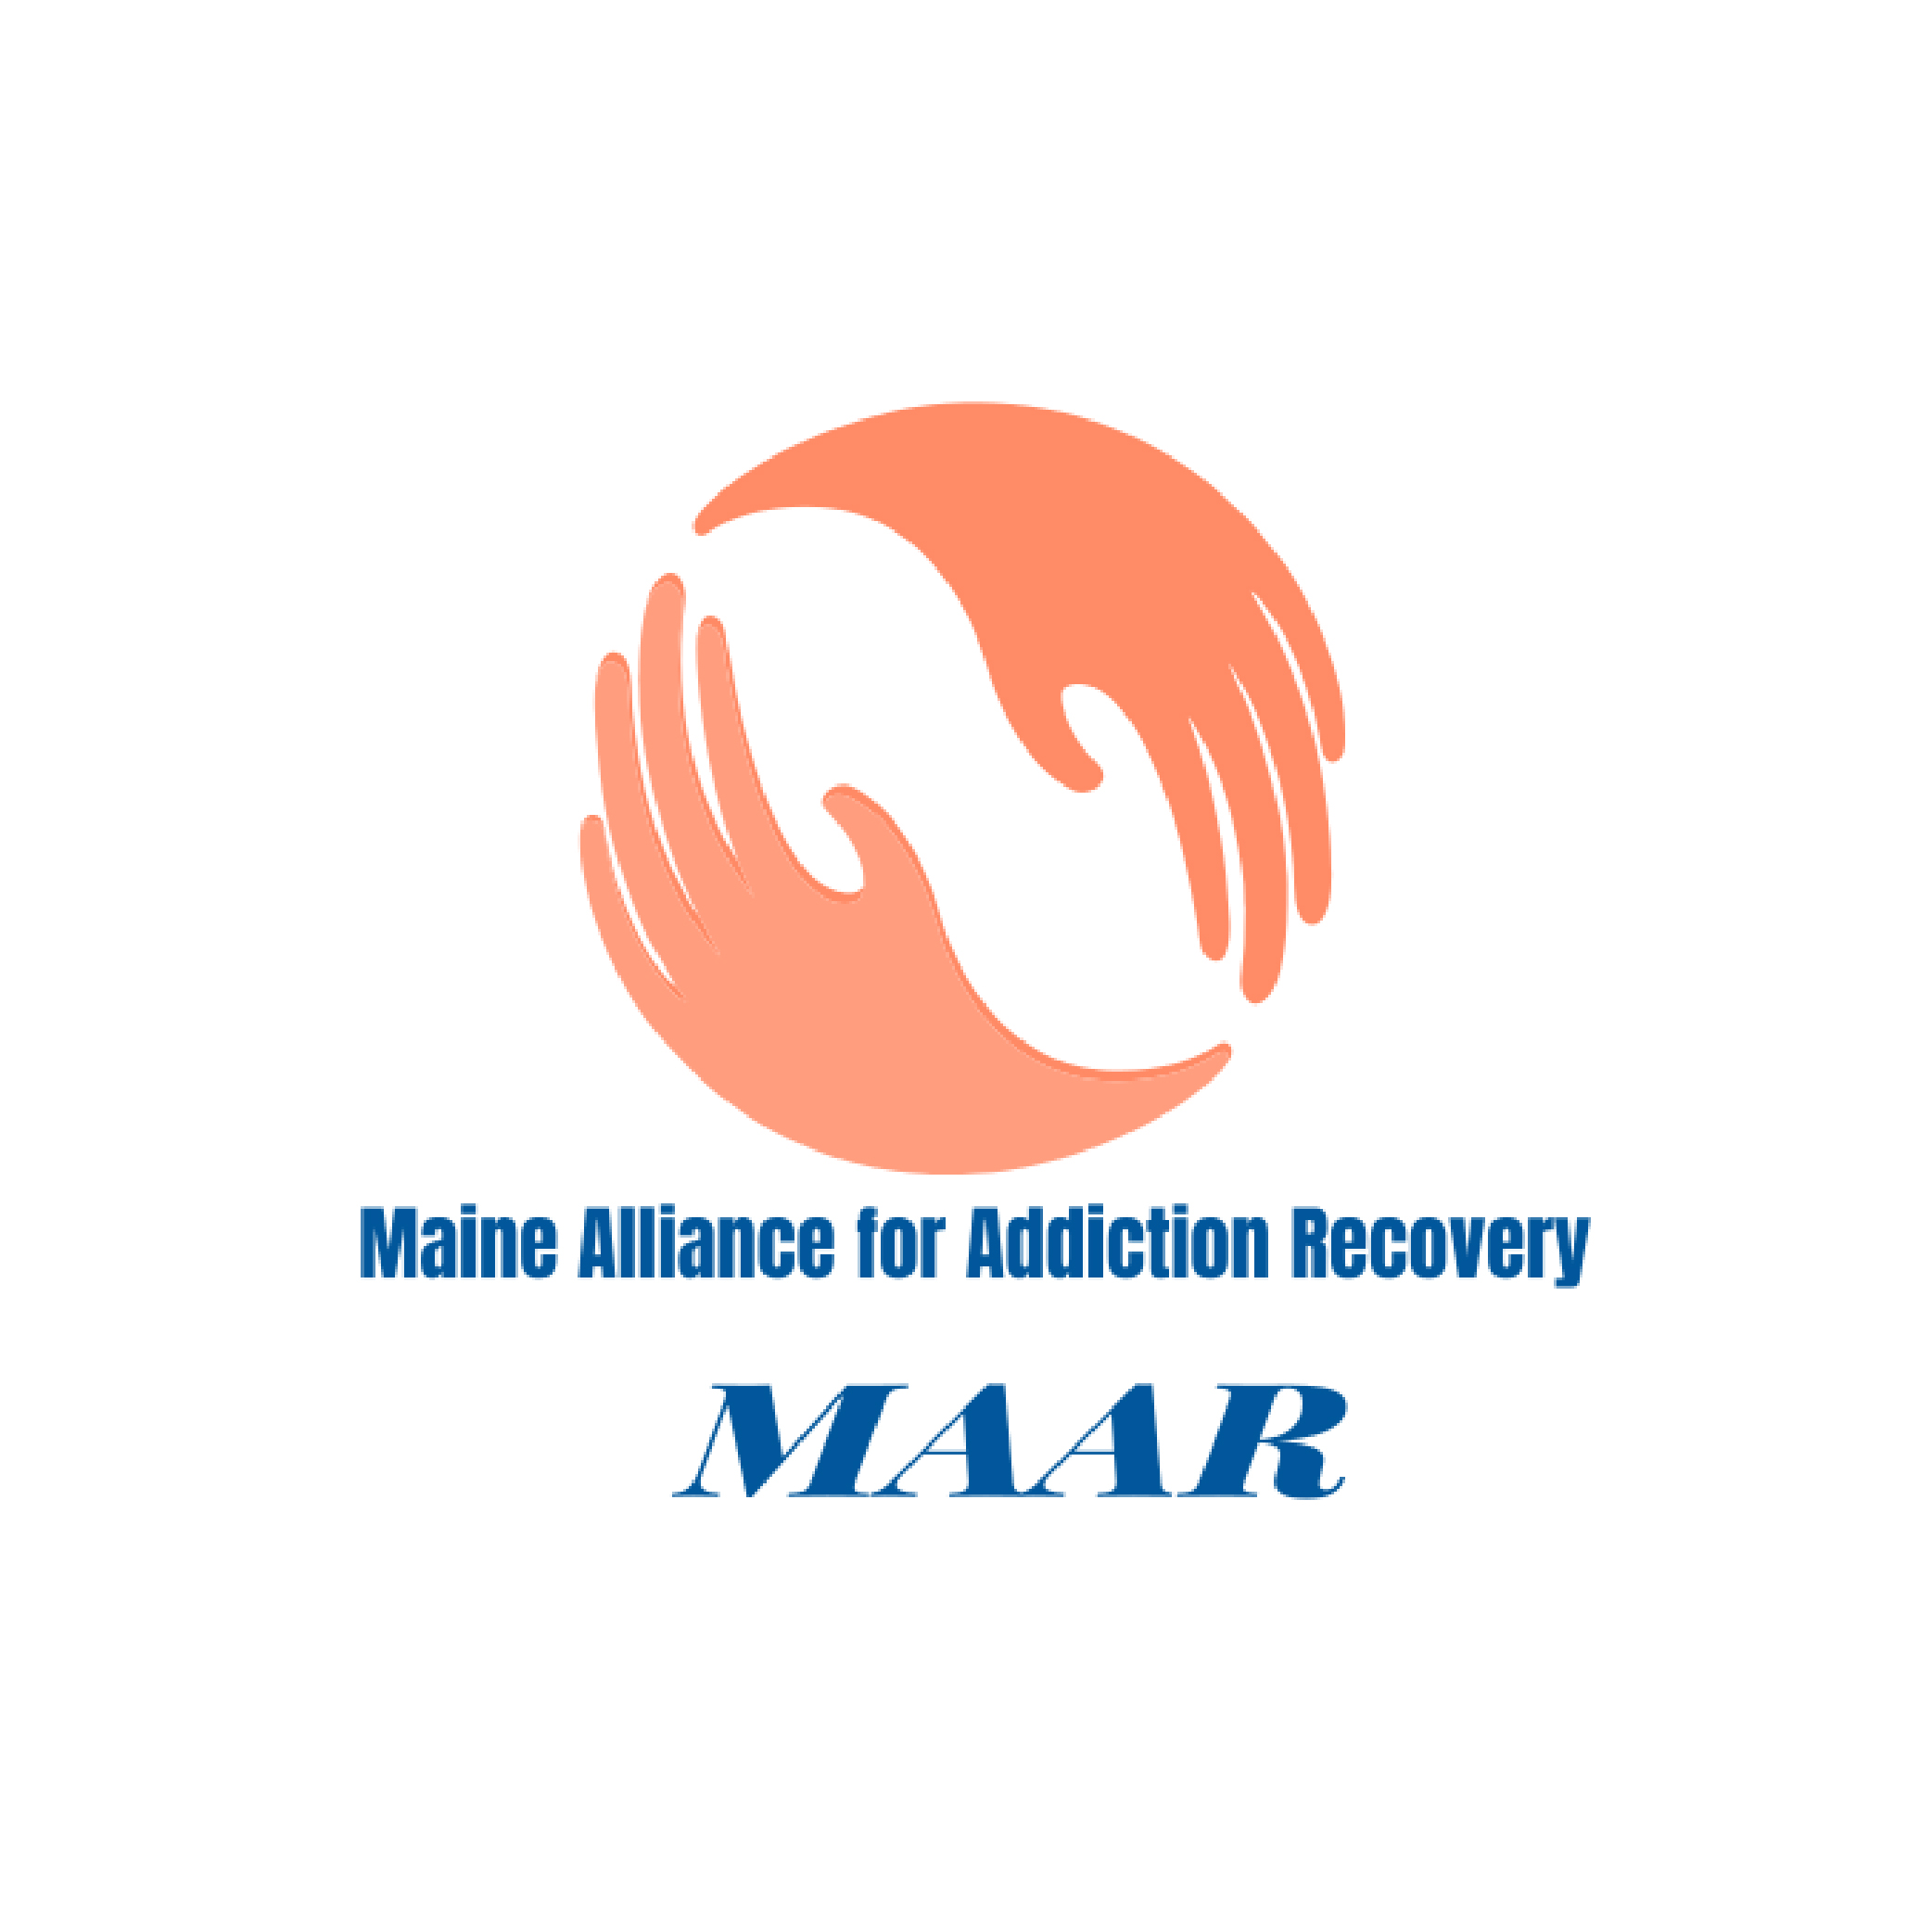 Main Alliance for Addiction Recovery logo